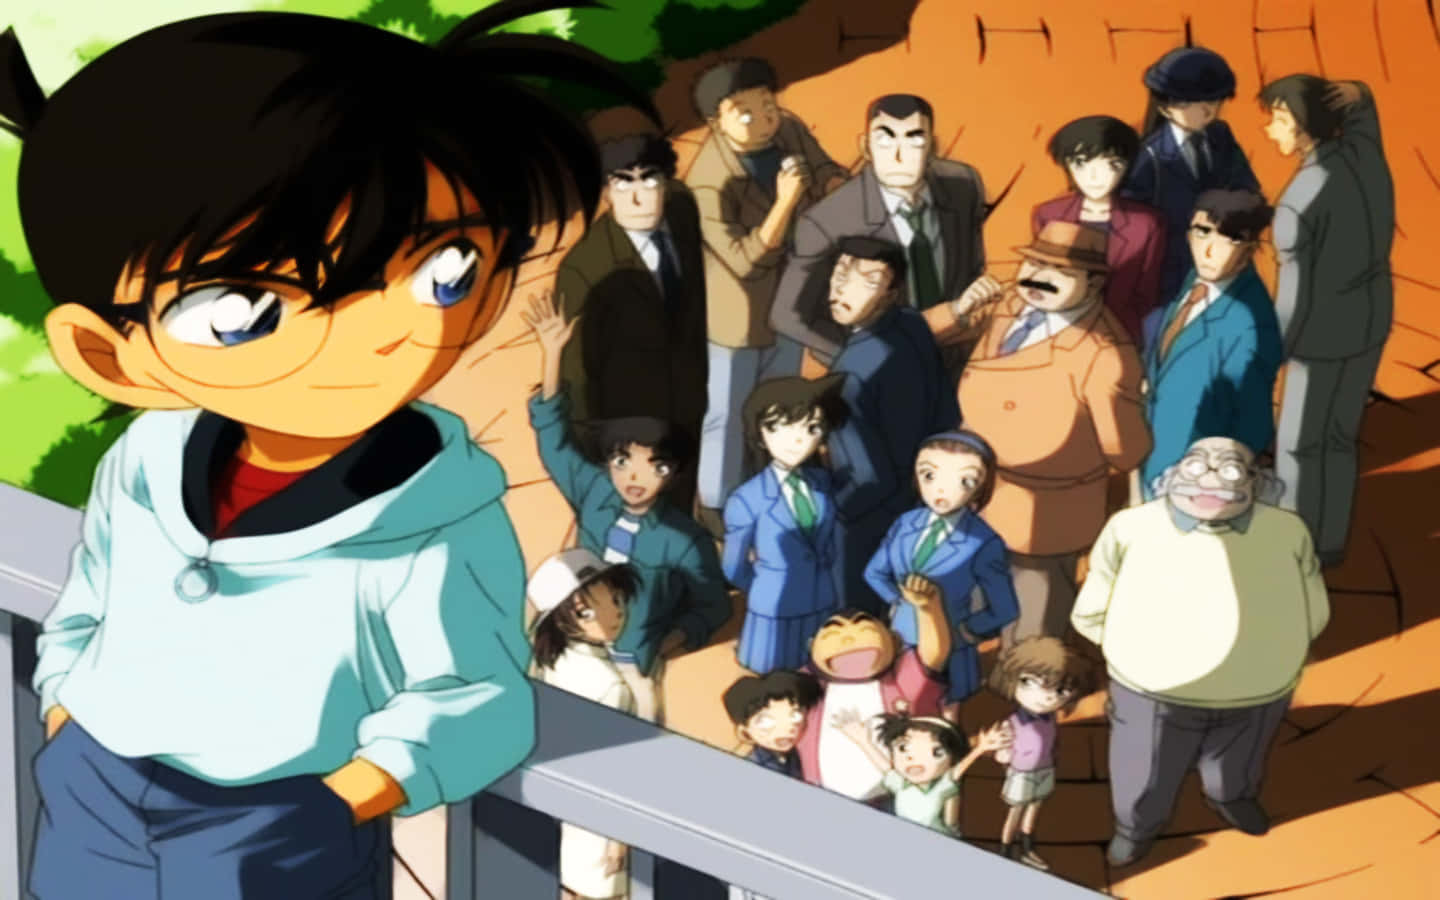 Deduction And Adventure With Detective Conan